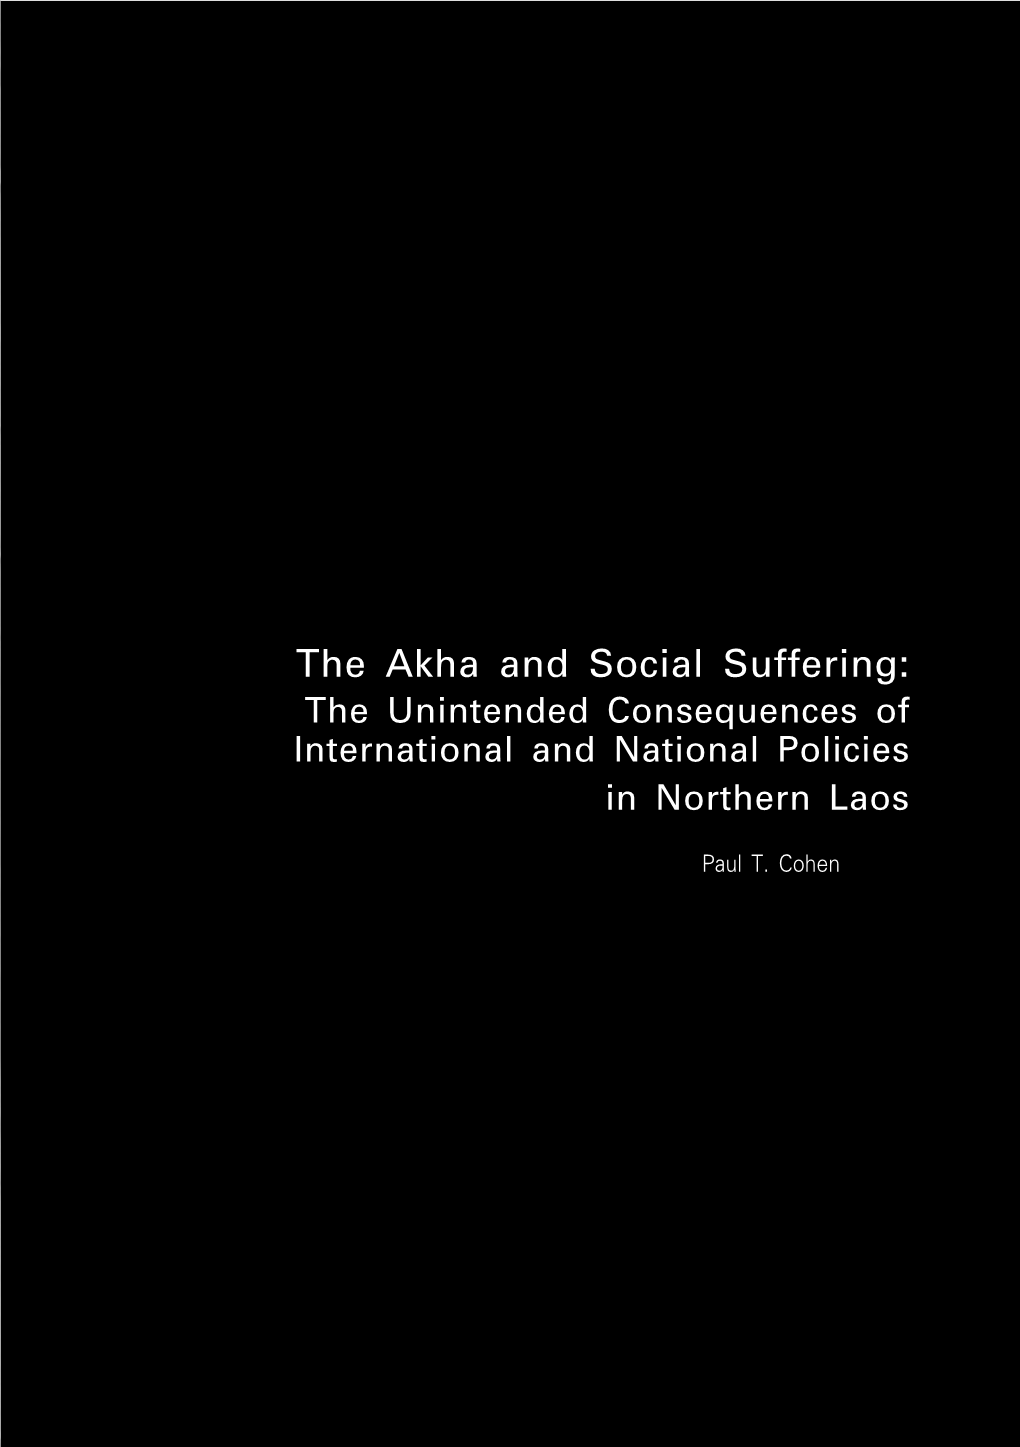 The Akha and Social Suffering: the Unintended Consequences of International and National Policies in Northern Laos Paul T